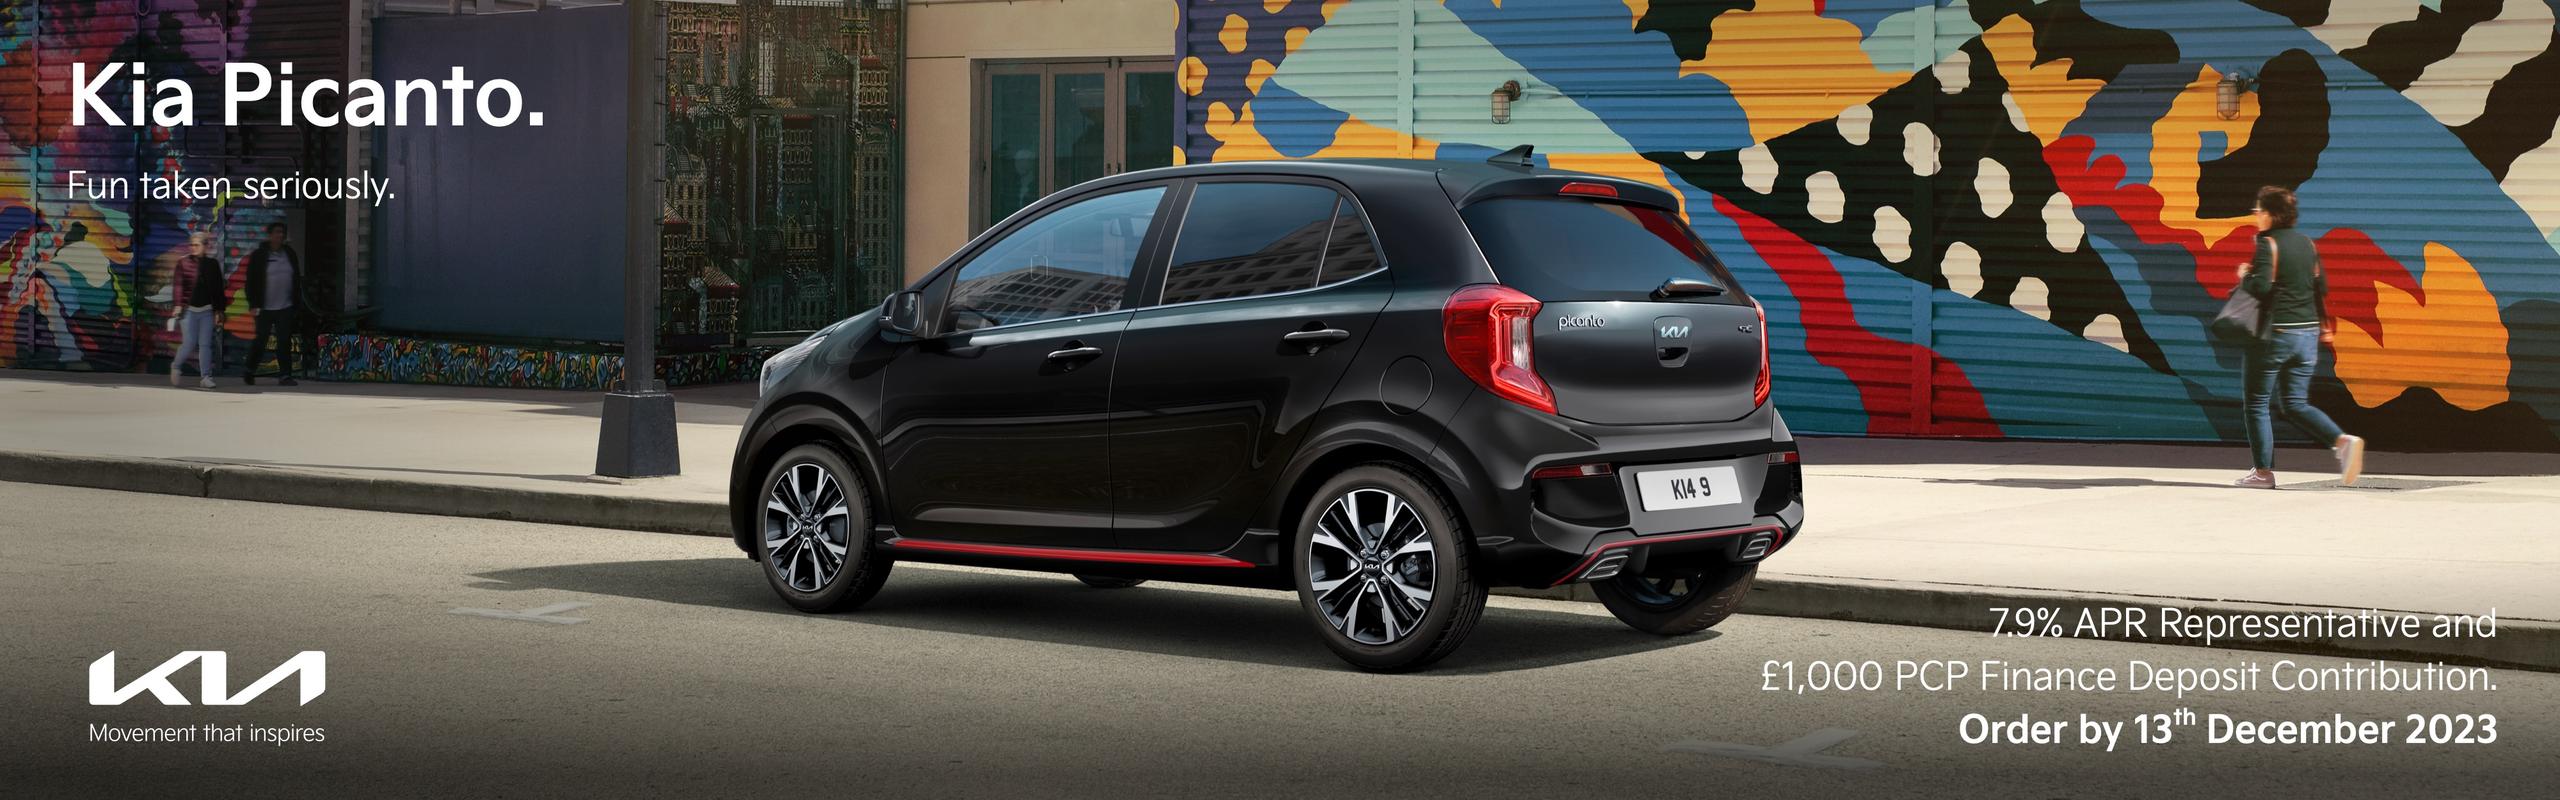 Kia Picanto - fun taken seriously. 7.9% APR representative and £1,000 PCP Finance Deposit Contribution. Order by 13th December 2023.